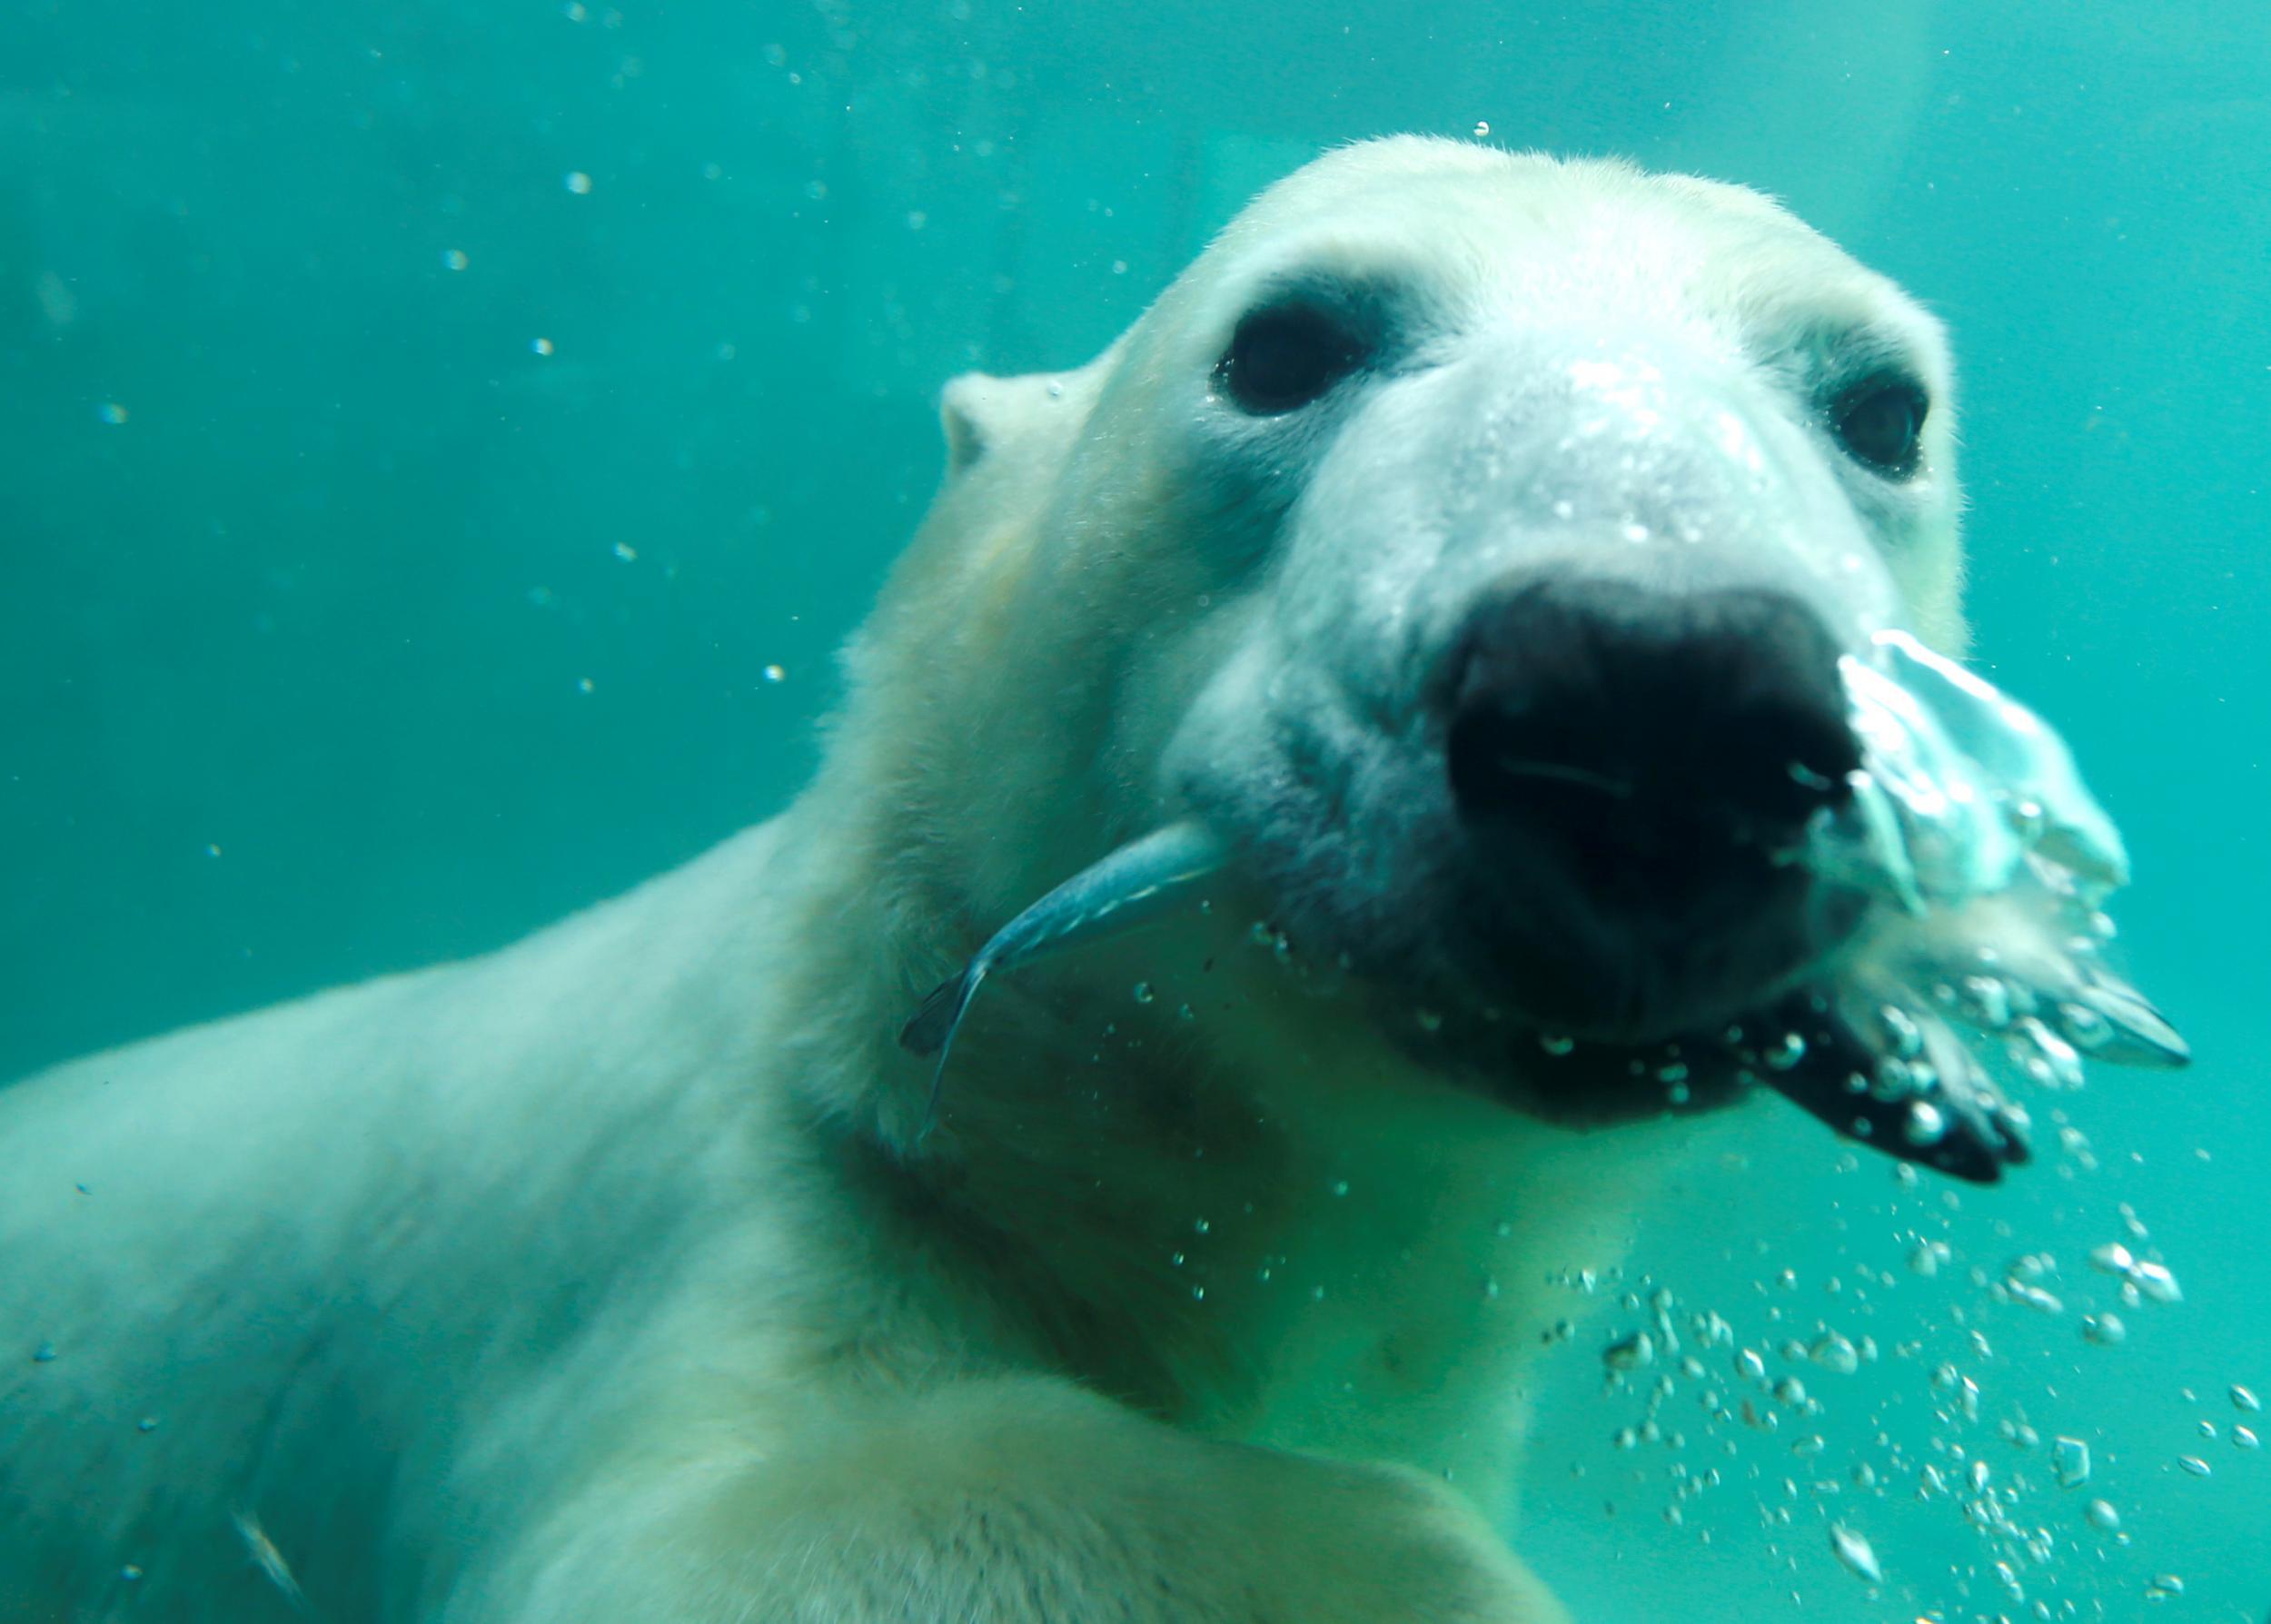 A polar bear eats a snack in the pool at Budapest zoo in Hungary